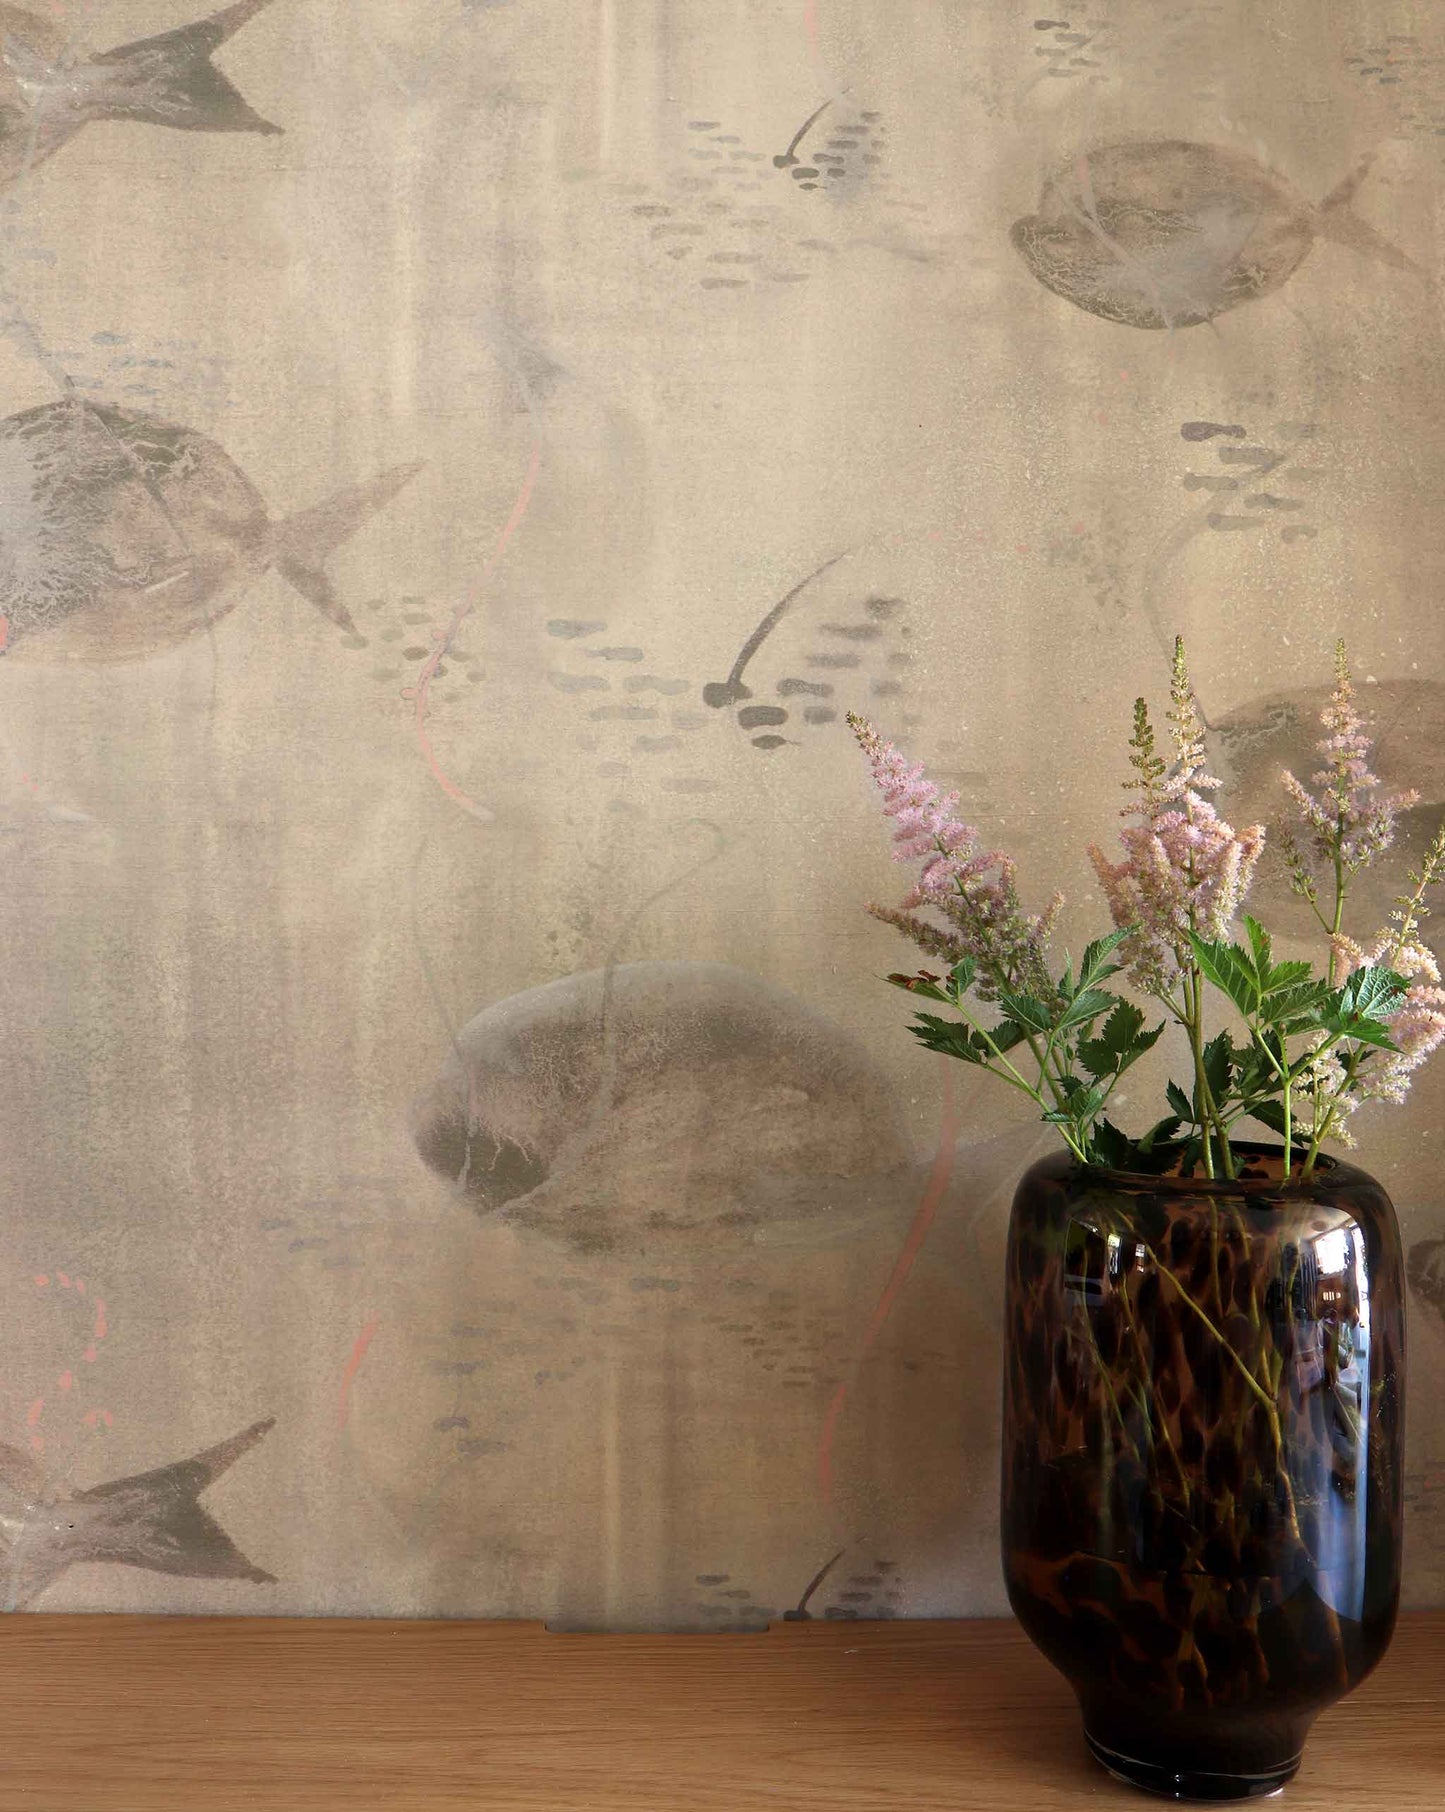 Eskayel’s Shoal wallpaper in Shell with its beige hues is printed on paper backed silk and installed in a room behind a wooden table with a vase of flowers on top.